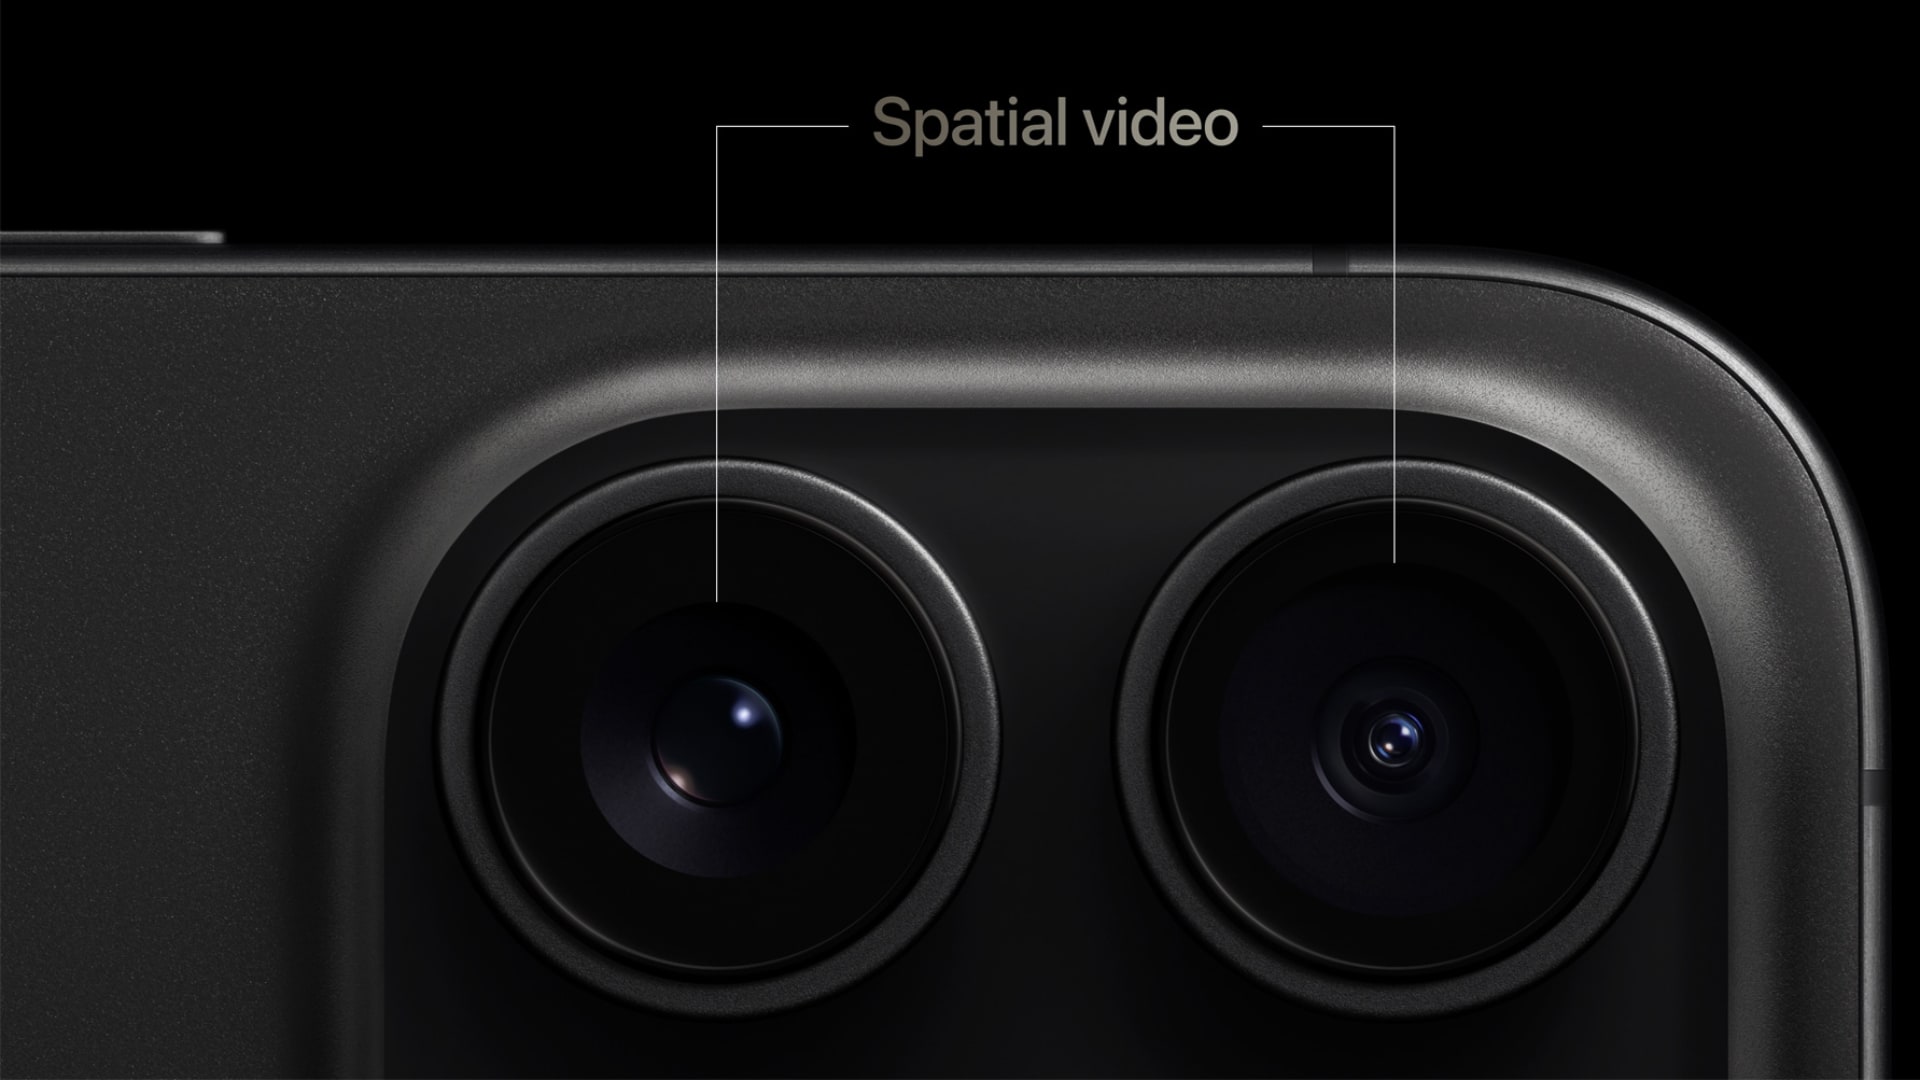 iOS 18 enables third-party camera apps to implement spatial video recording